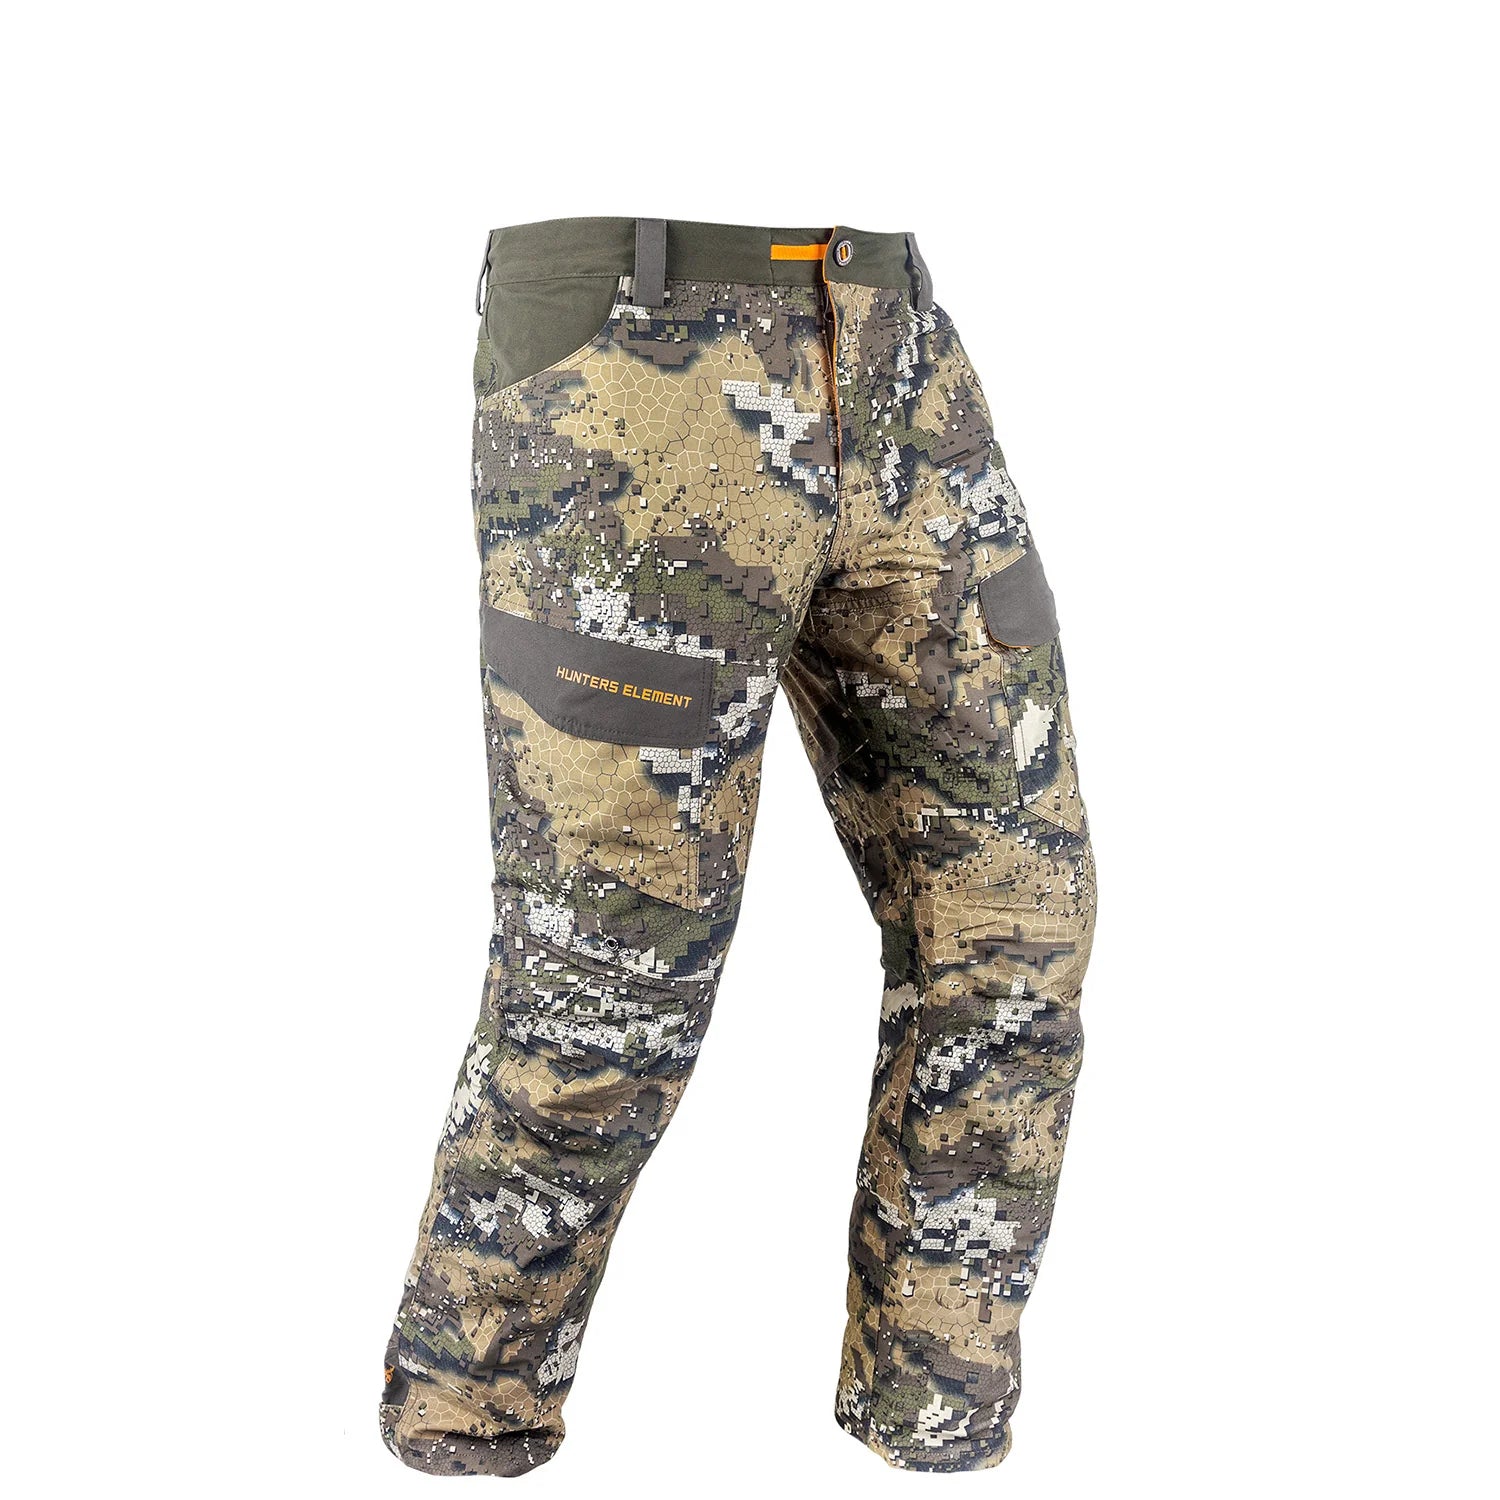 Hunters Element Downpour Elite Trouser - S / DESOLVE VEIL - Mansfield Hunting & Fishing - Products to prepare for Corona Virus